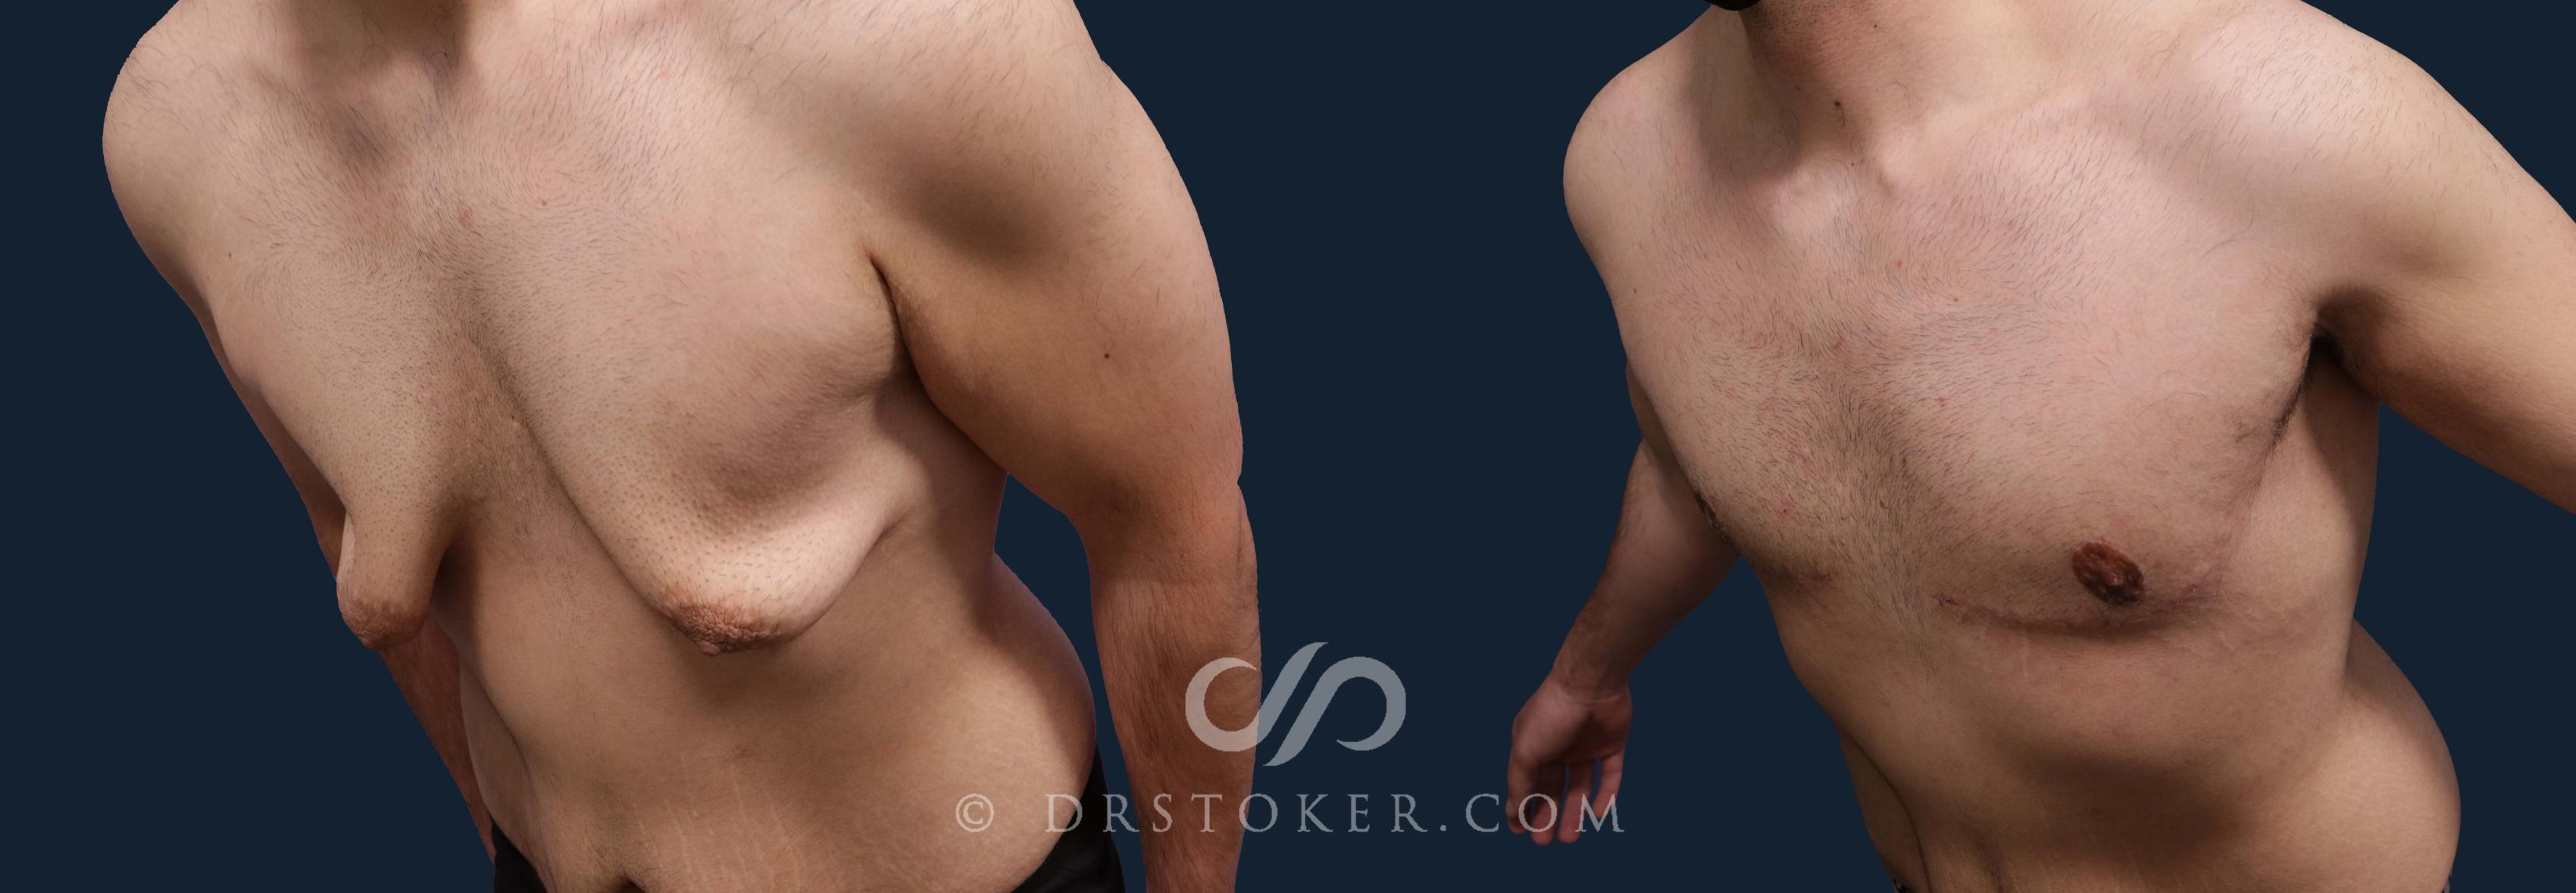 Before & After After Weight Loss Case 2019 Left Oblique View in Los Angeles, CA